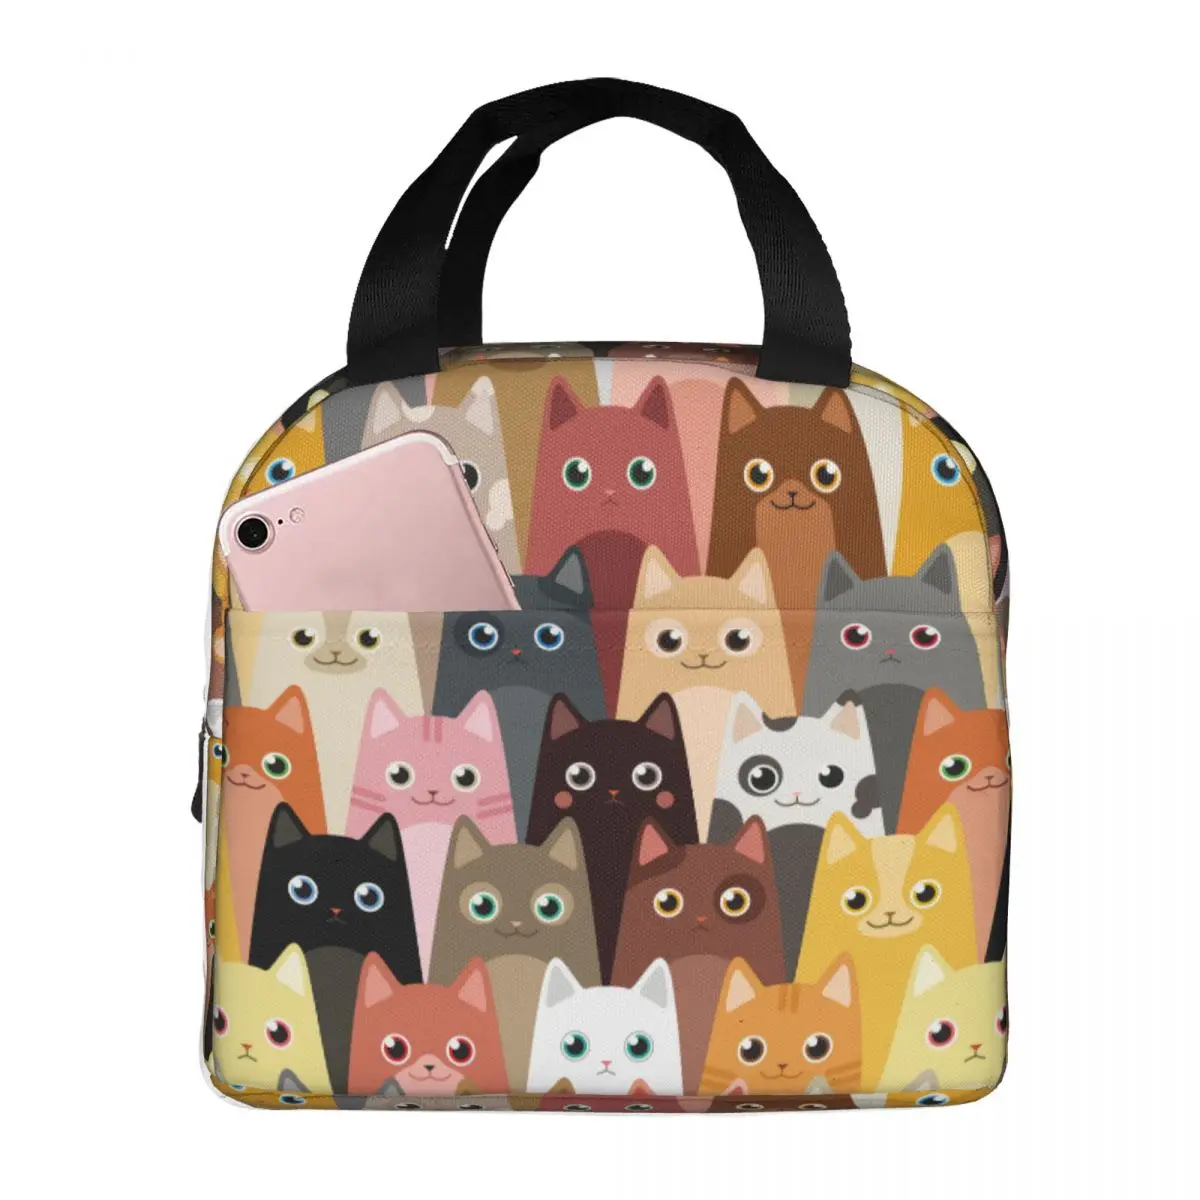 Cat Lunch Bags Portable Insulated Oxford Cooler Animal Thermal Picnic Lunch Box for Women Girl